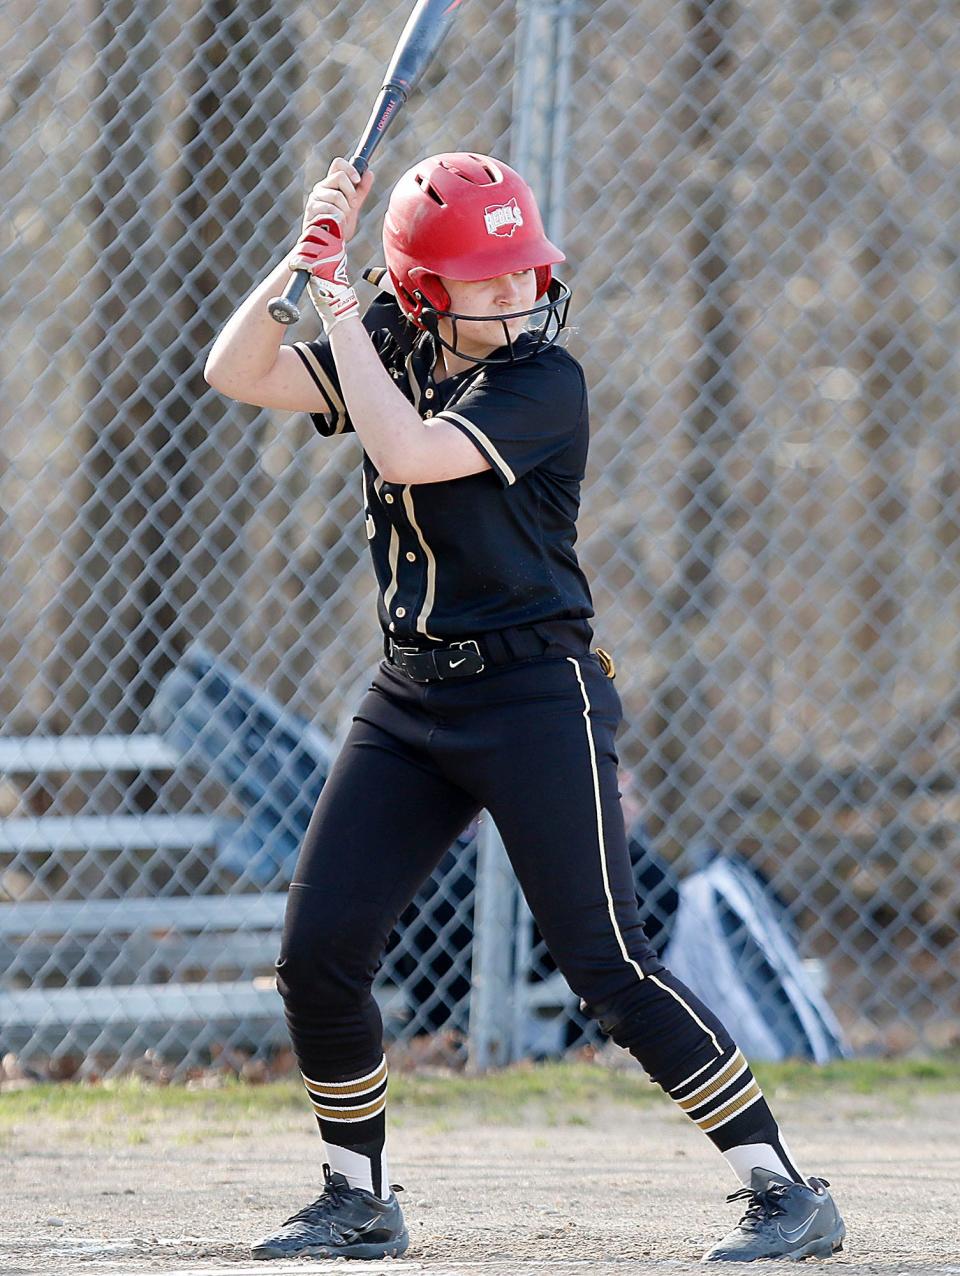 South Central High School's Olivia Hudson (2) bats against Loudonville High School during their high school girls softball game Tuesday, March 30, 2021 South Central High School. TOM E. PUSKAR/TIMES-GAZETTE.COM